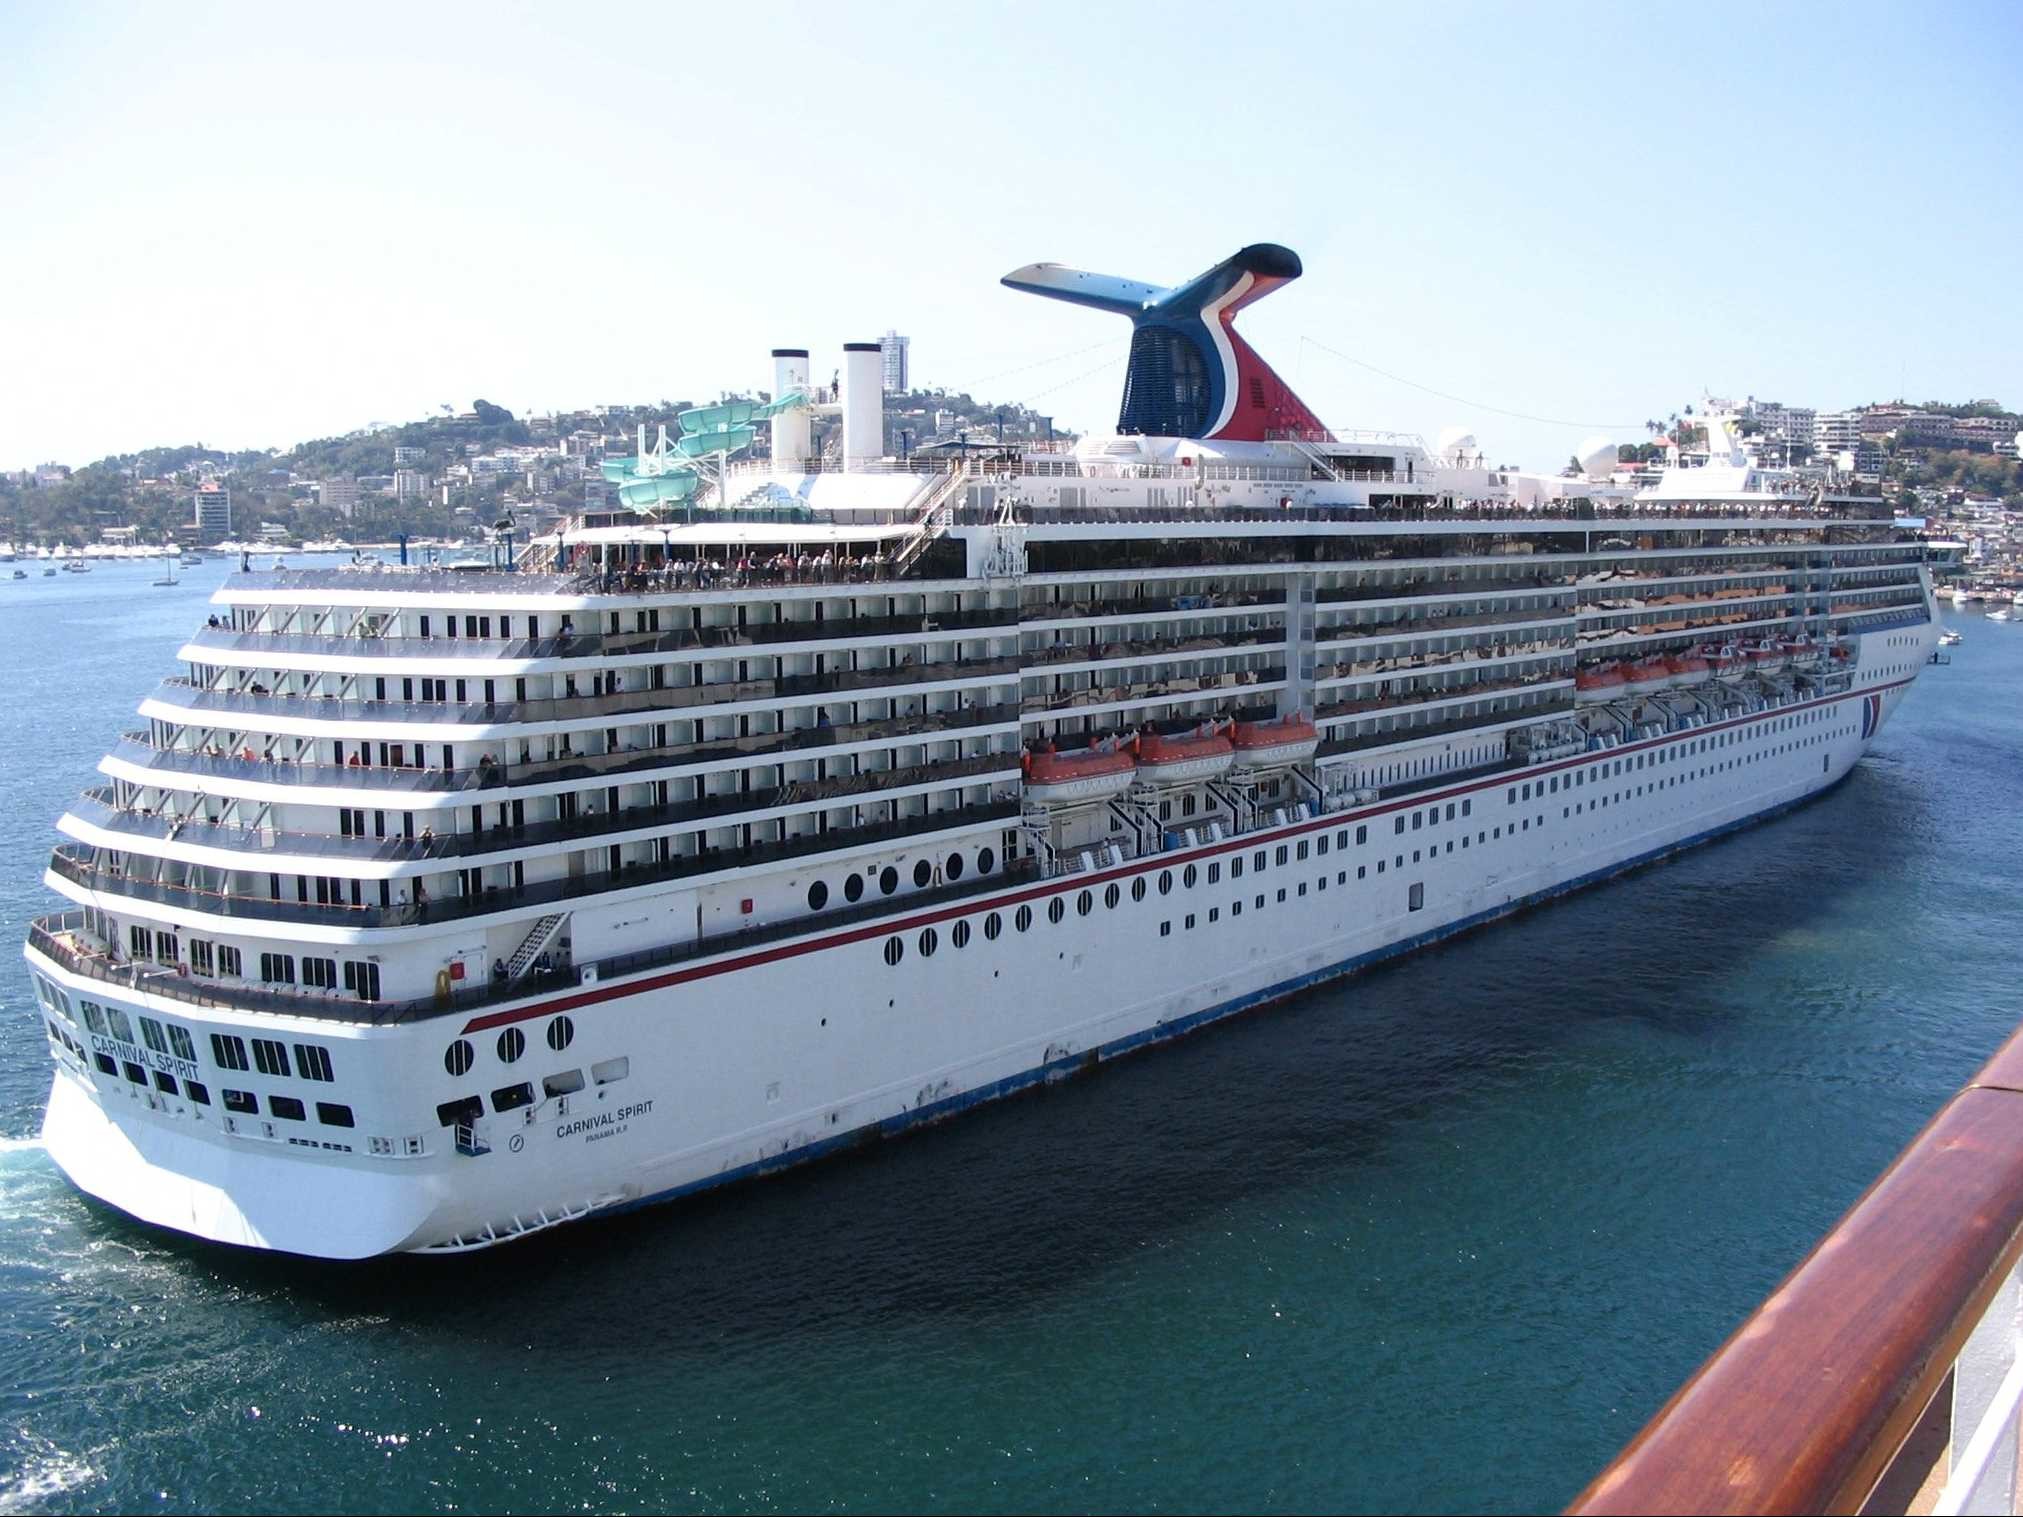 2023x1517 wallpapers 18 carnival cruise ship docked wallpaper